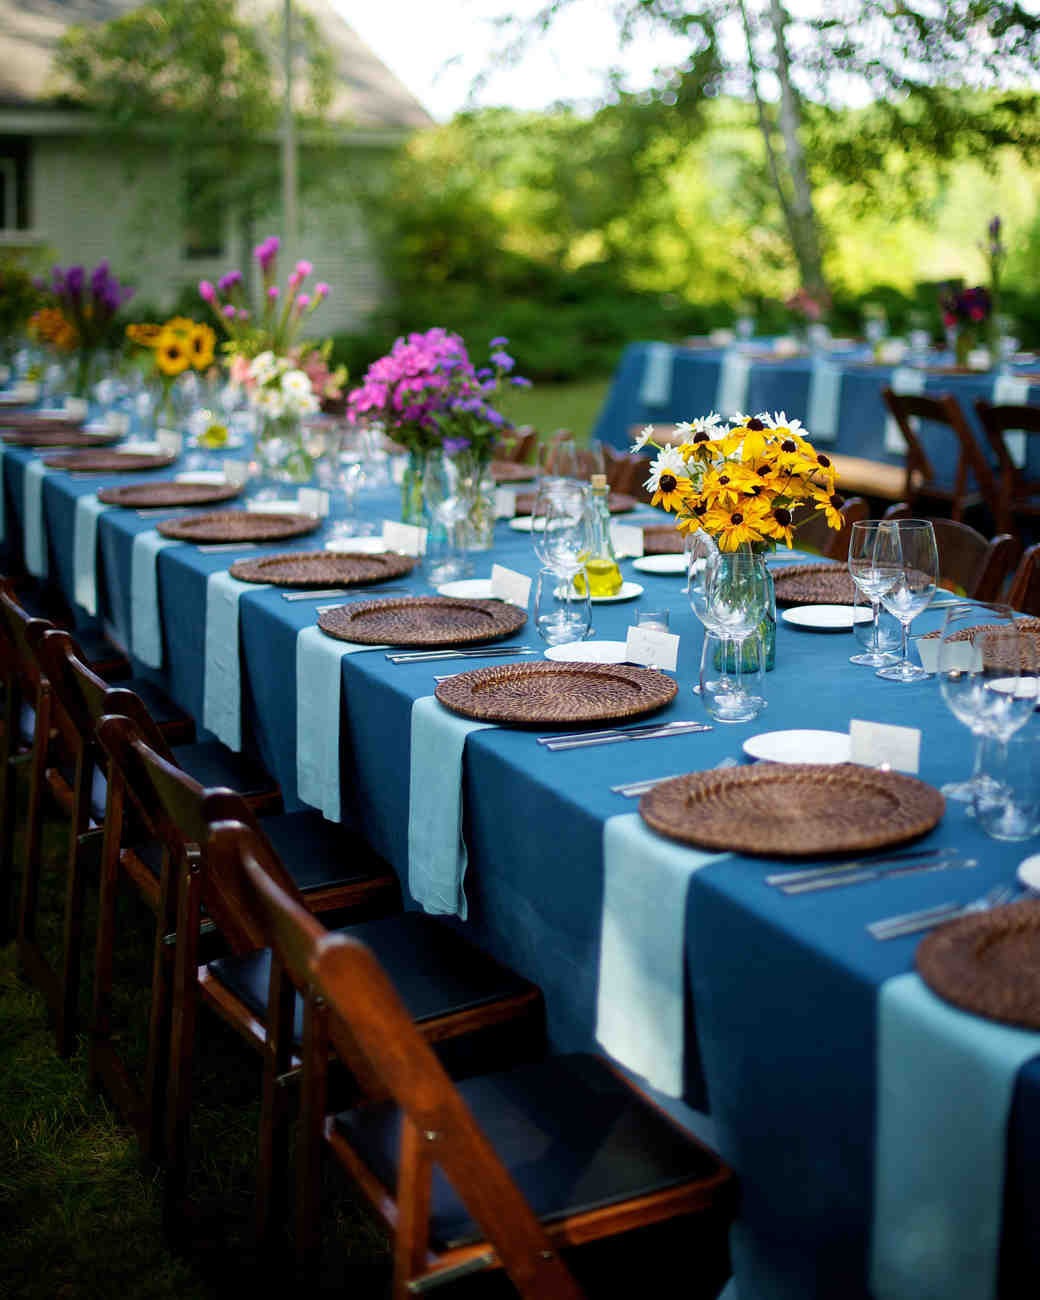 Engagement Party Backyard Ideas
 How to Throw the Perfect Backyard Engagement Party